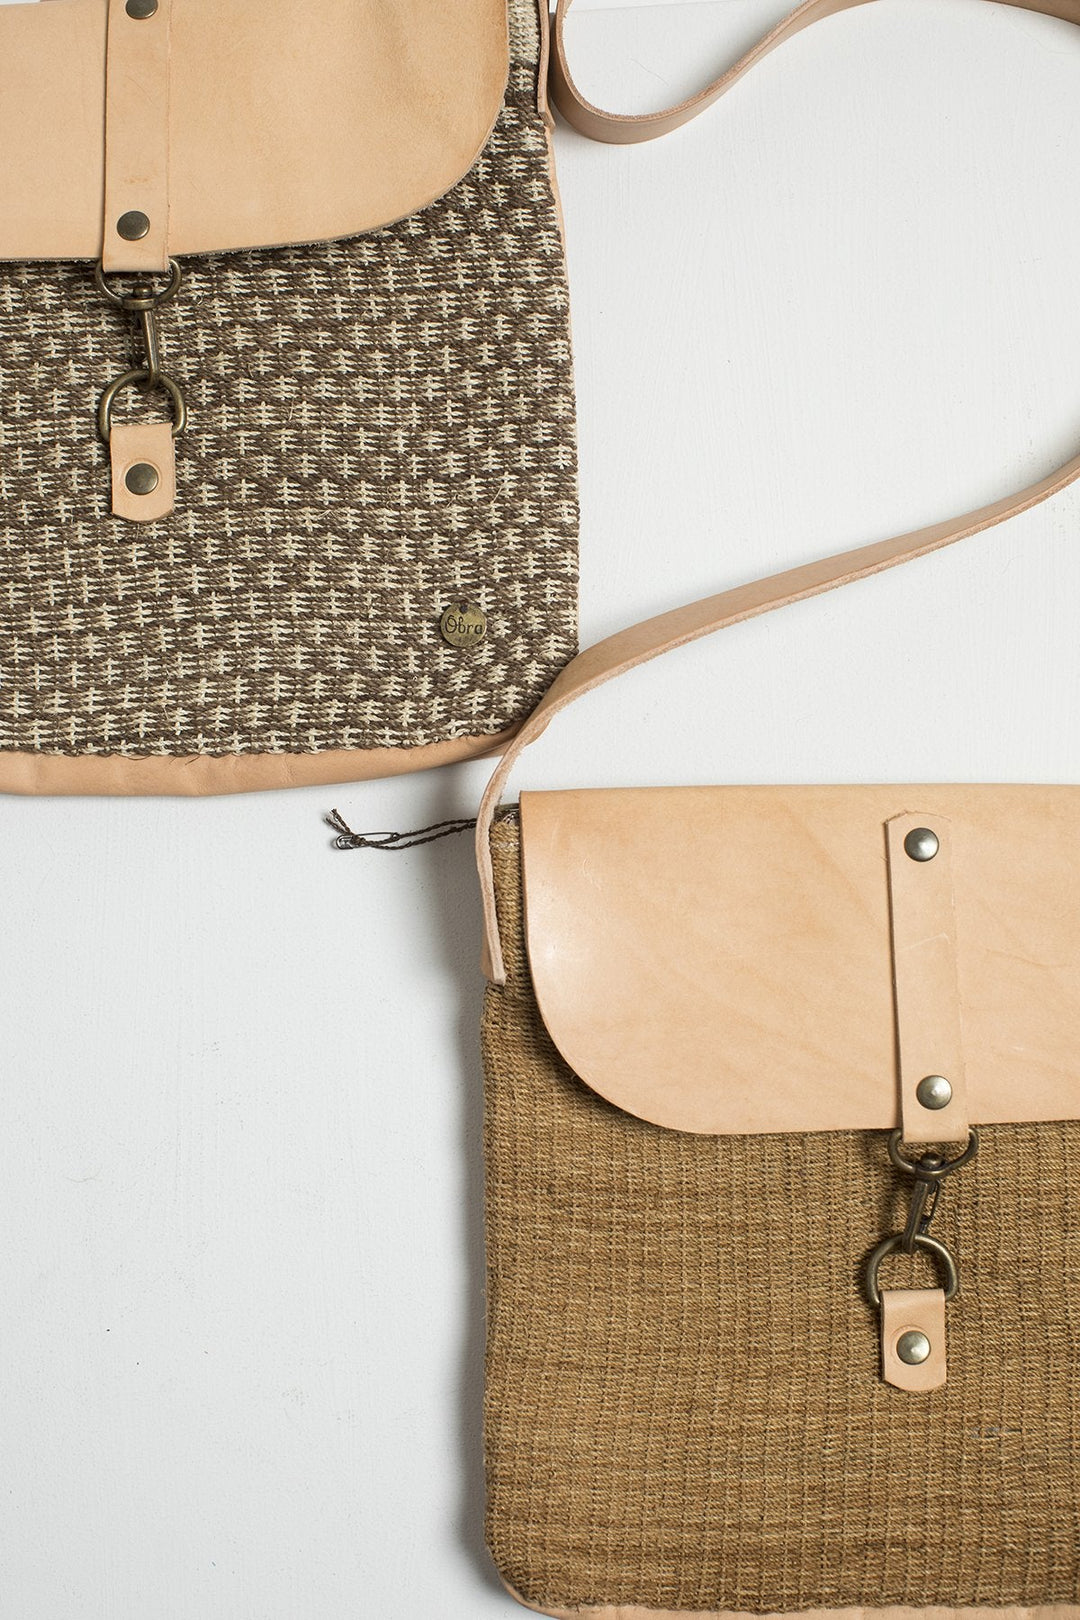 Hand Matters. Chaguar and leather small crossbody bags in brown and brick